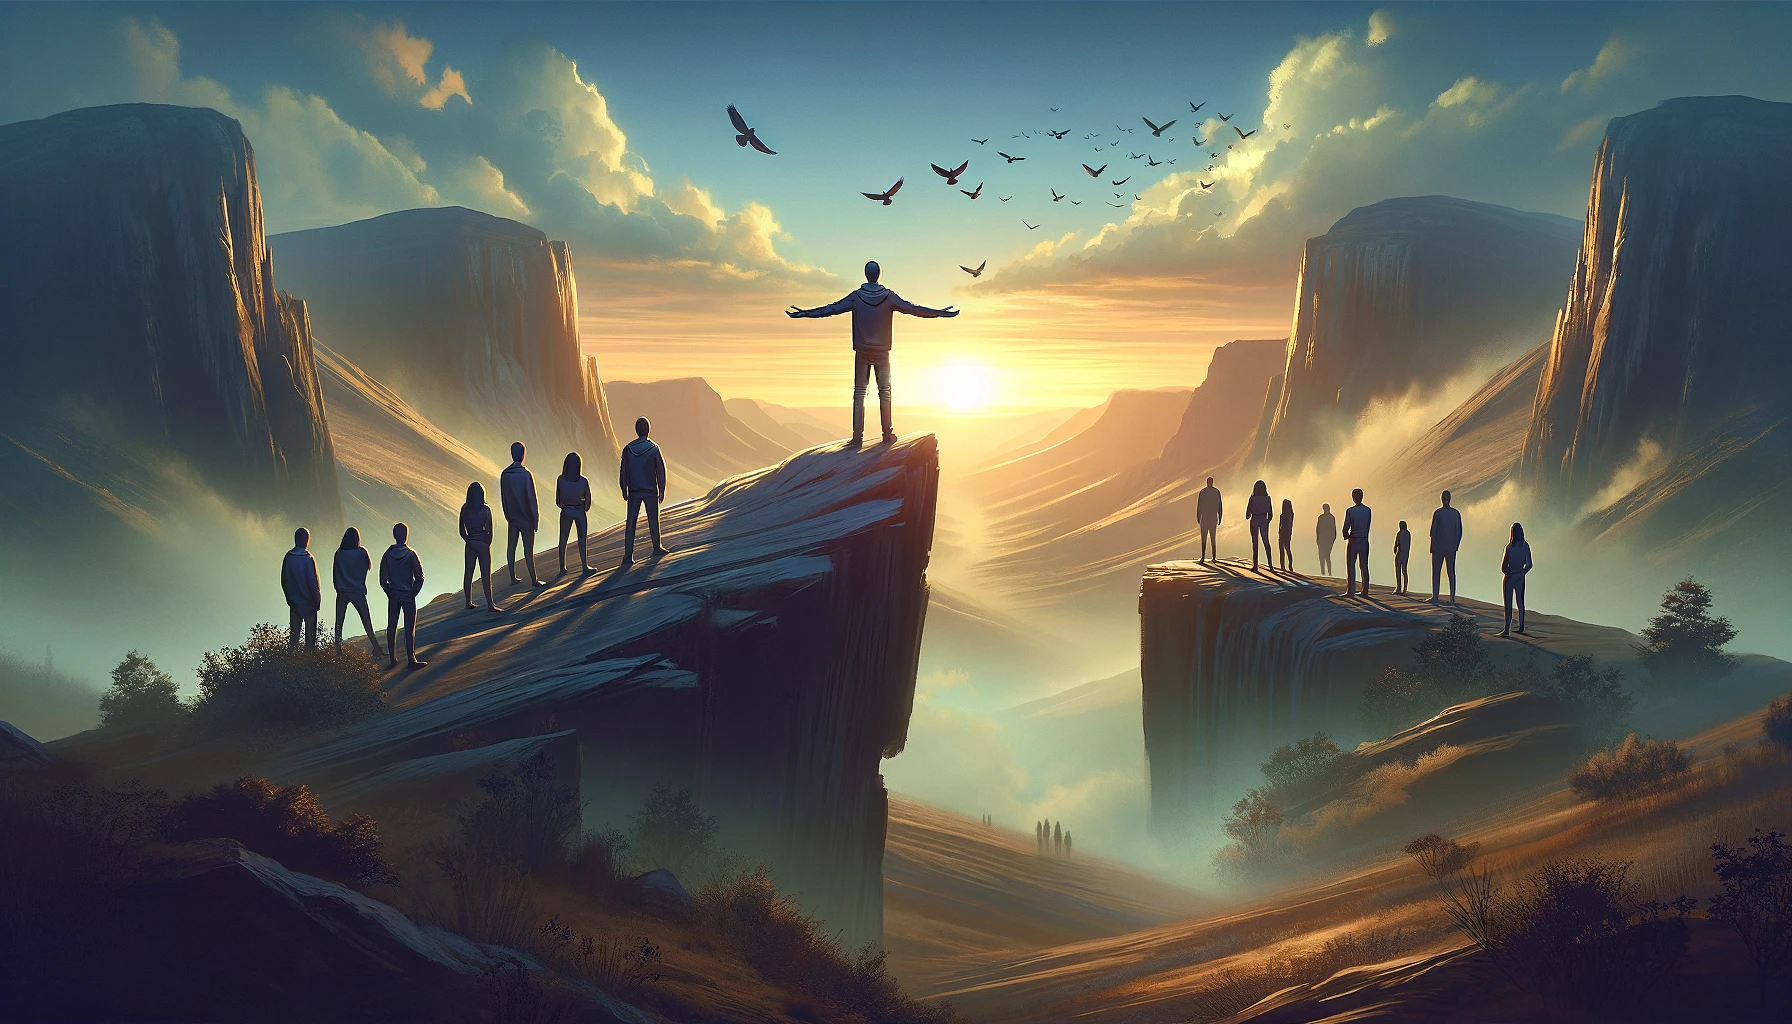 Visualize the concept of embracing powerlessness to empower others, set against the backdrop of February 17th. The scene depicts a person standing wit